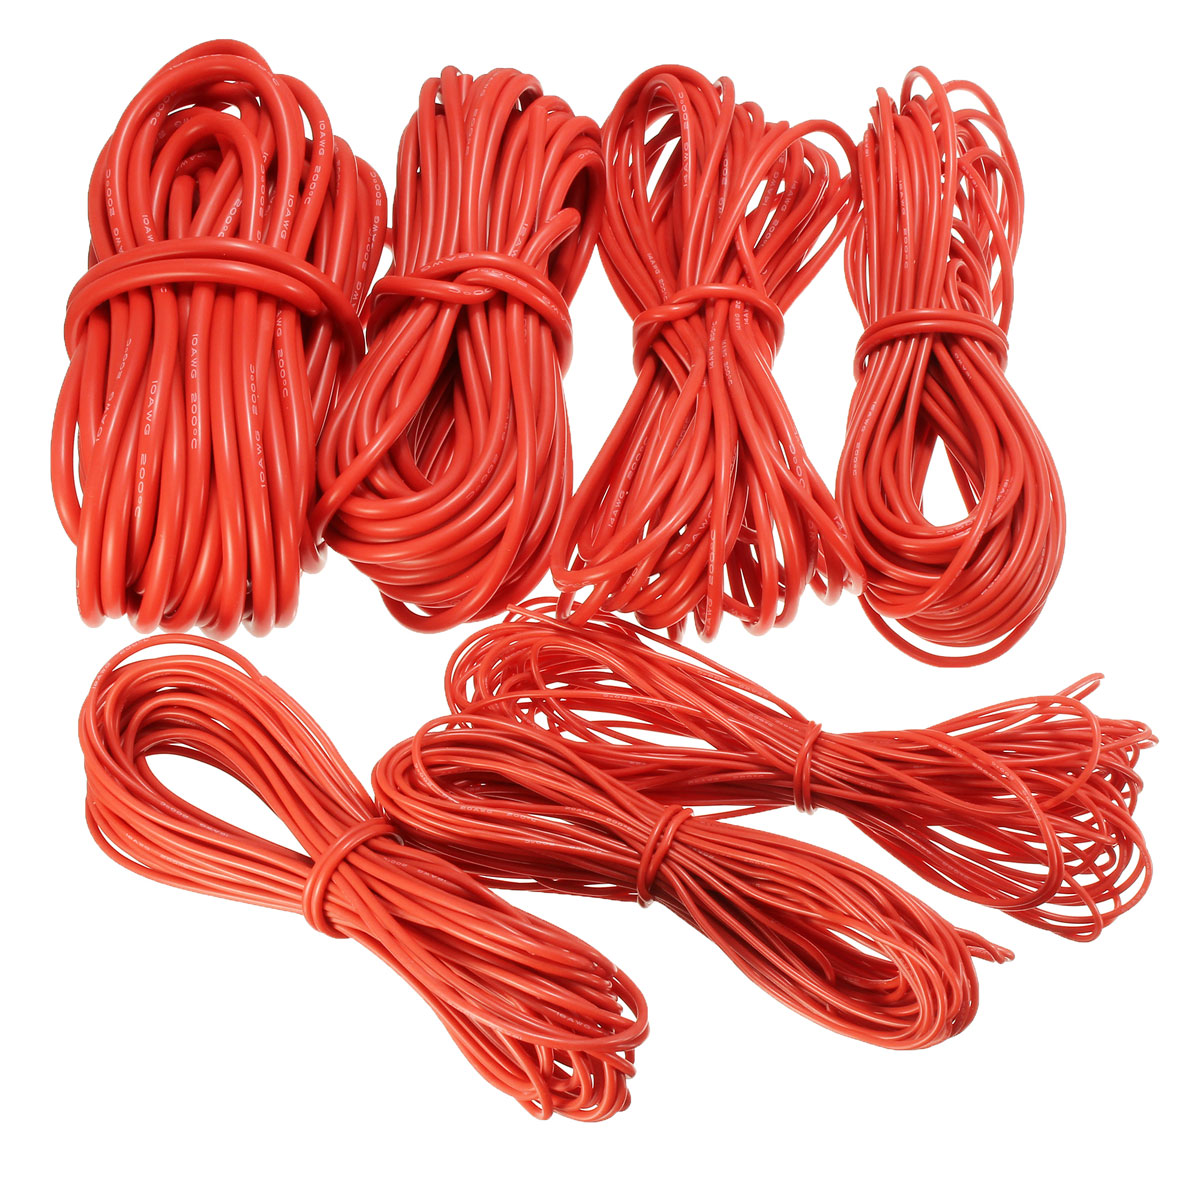 DANIU-10-Meter-Red-Silicone-Wire-Cable-10121416182022AWG-Flexible-Cable-1170297-1